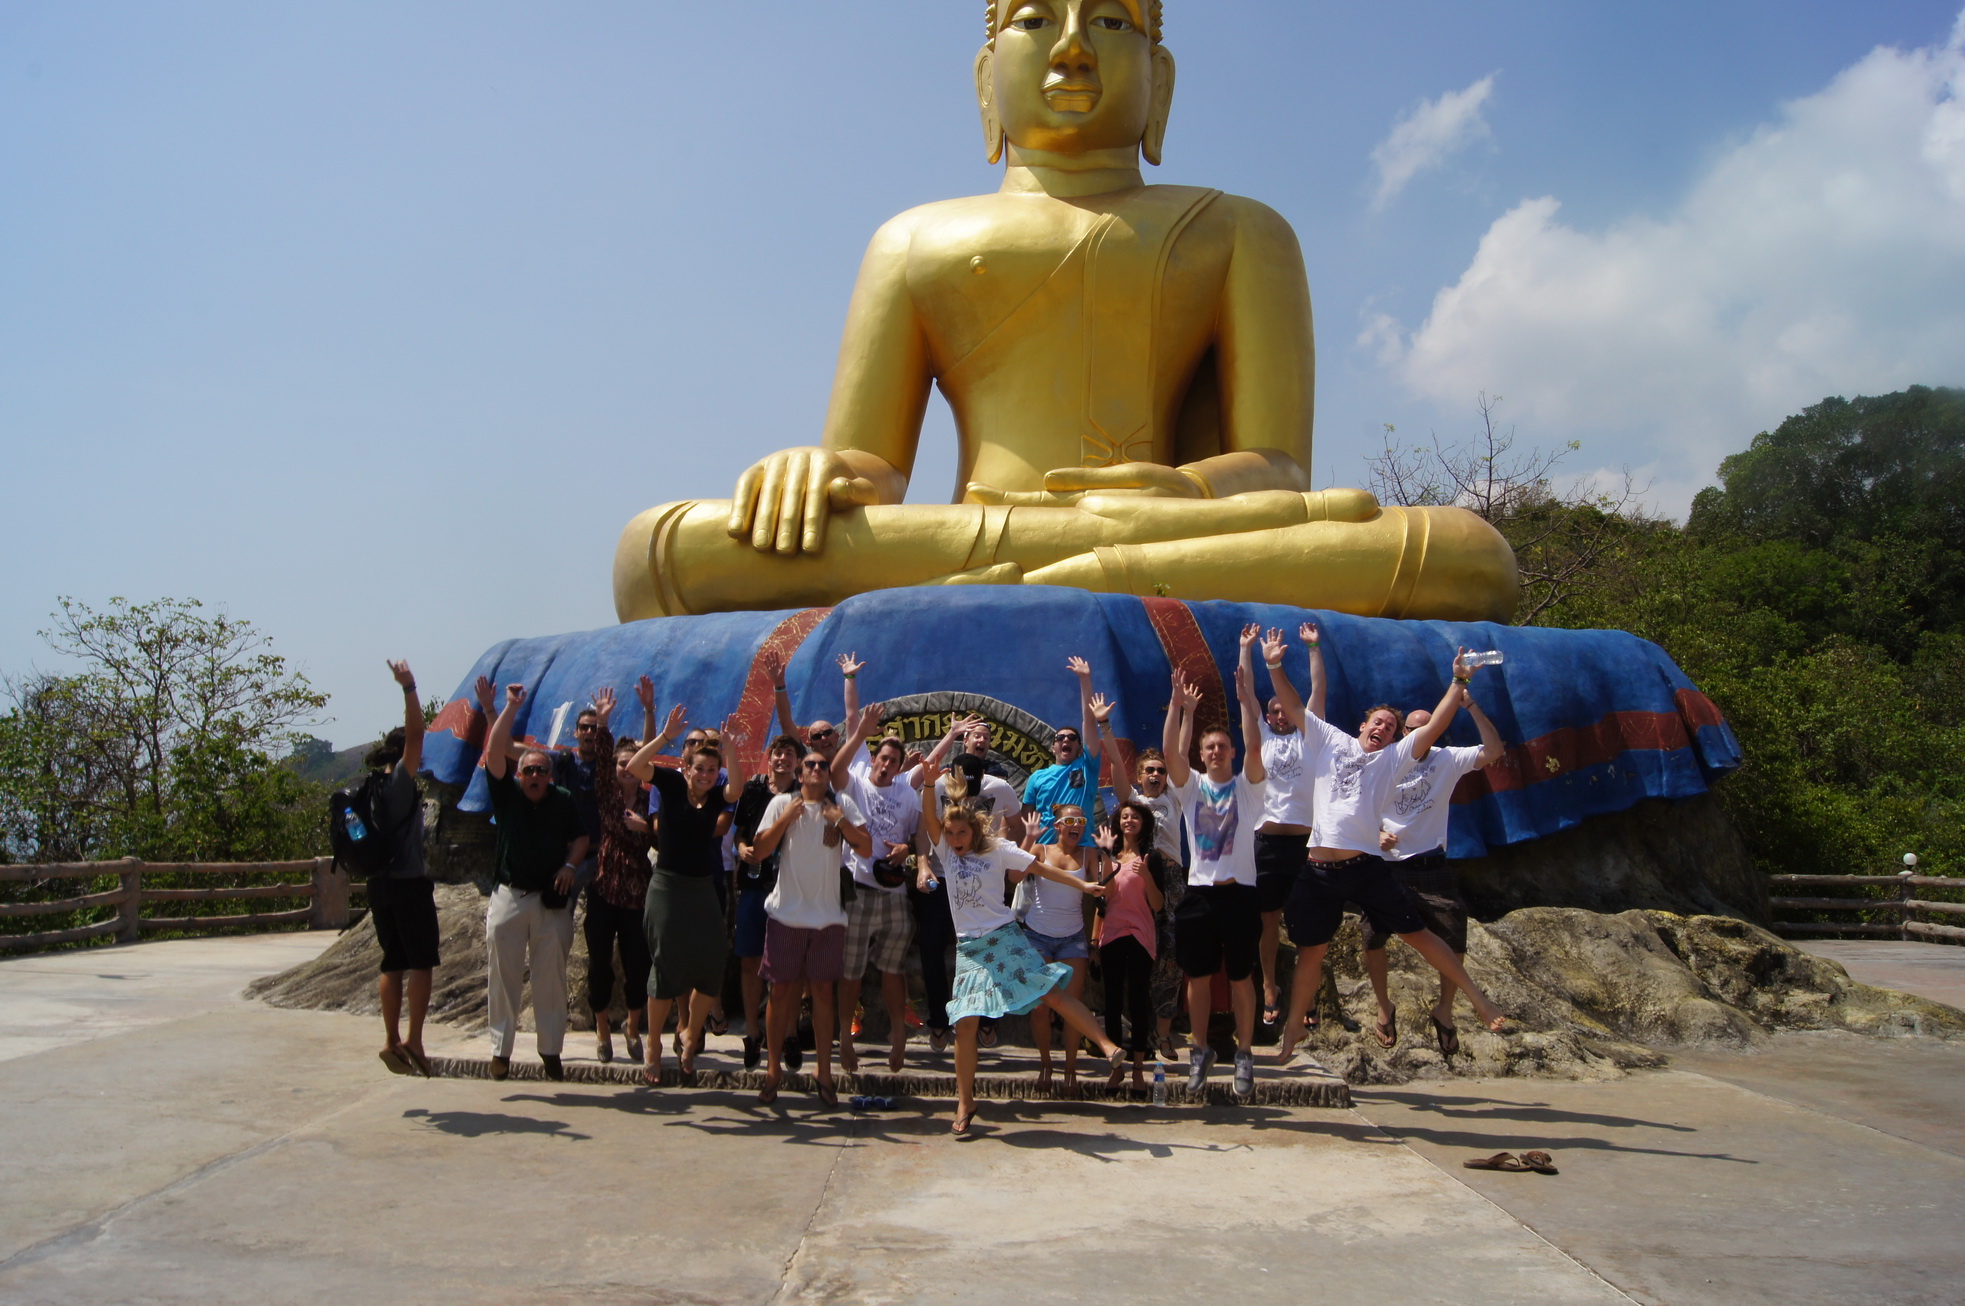 TESOL students pose for a photo during their Cultural Orientation in Hua Hin, Thailand